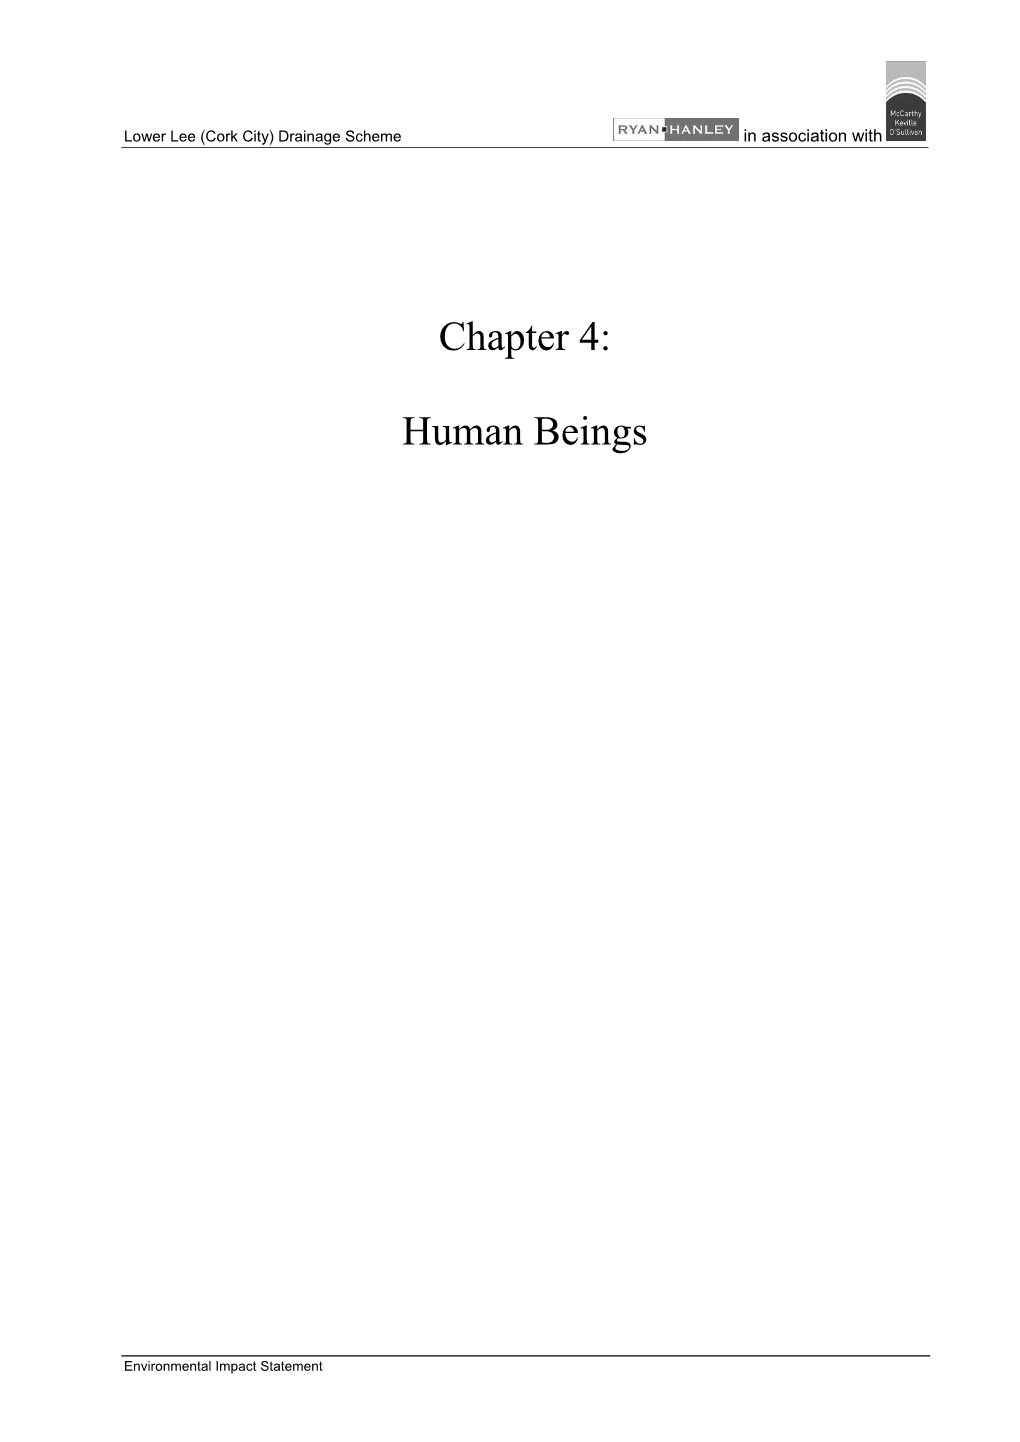 Chapter 4: Human Beings